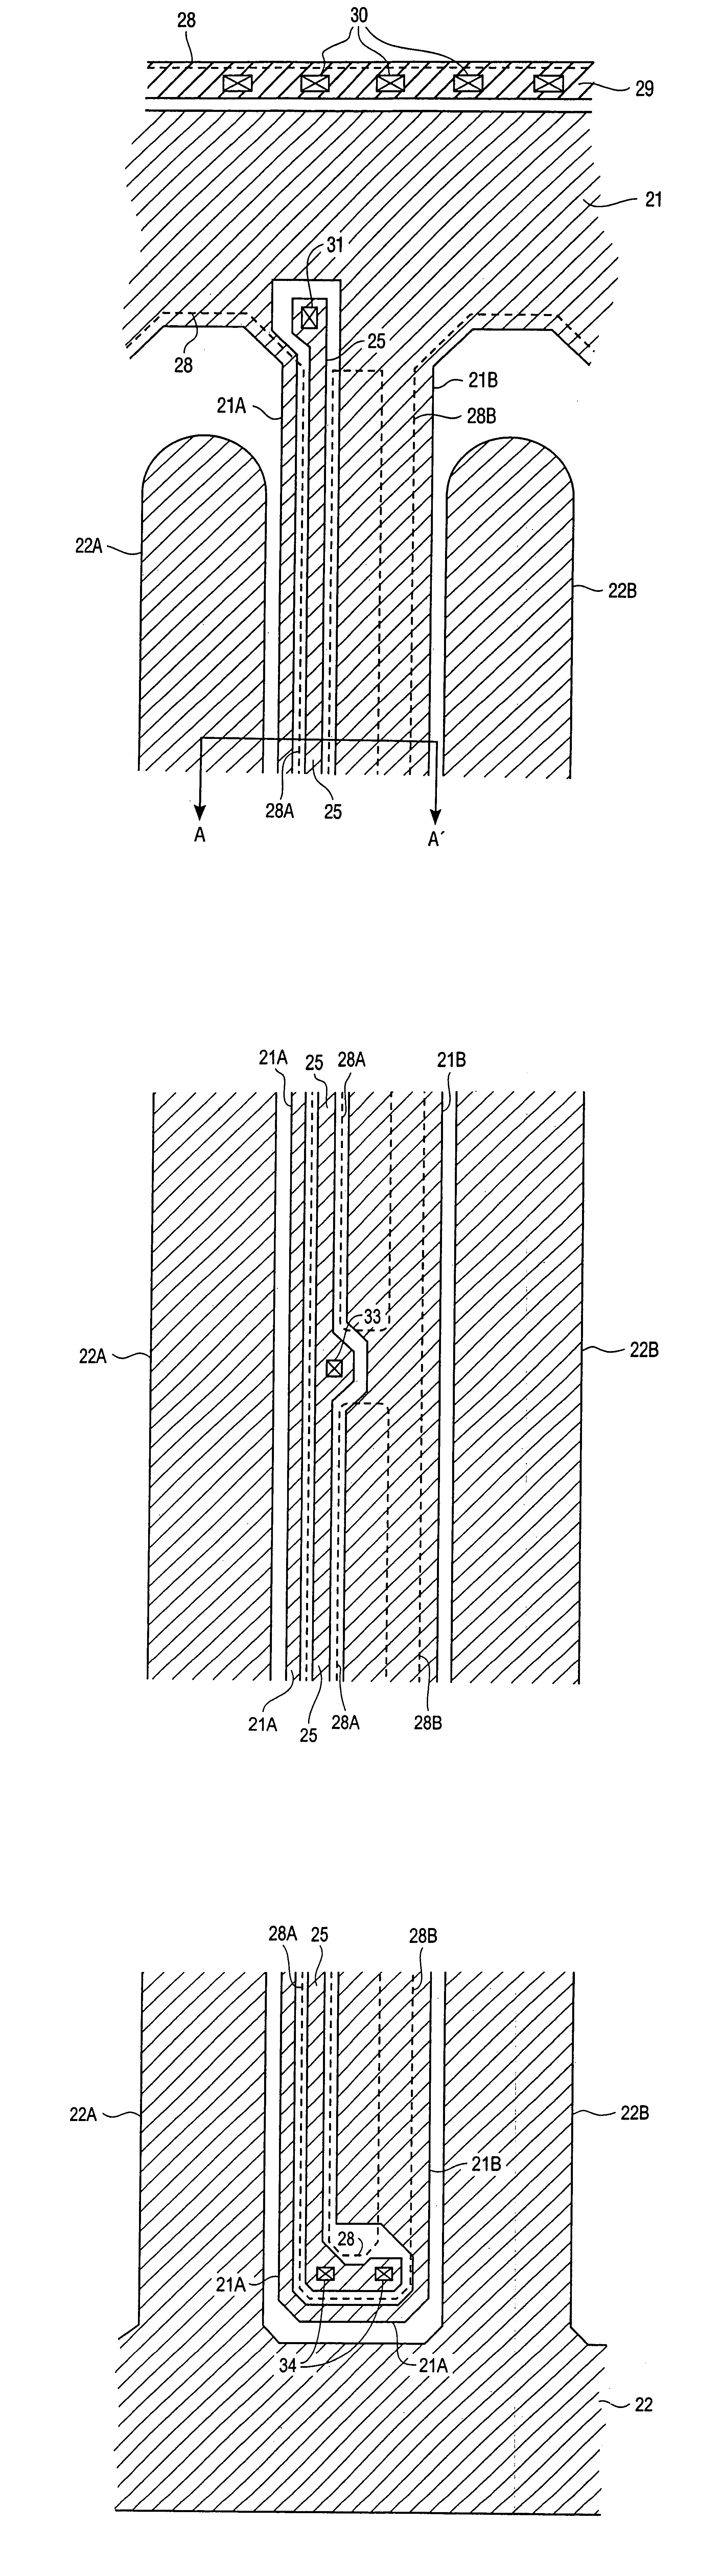 Lateral power MOSFET for high switching speeds